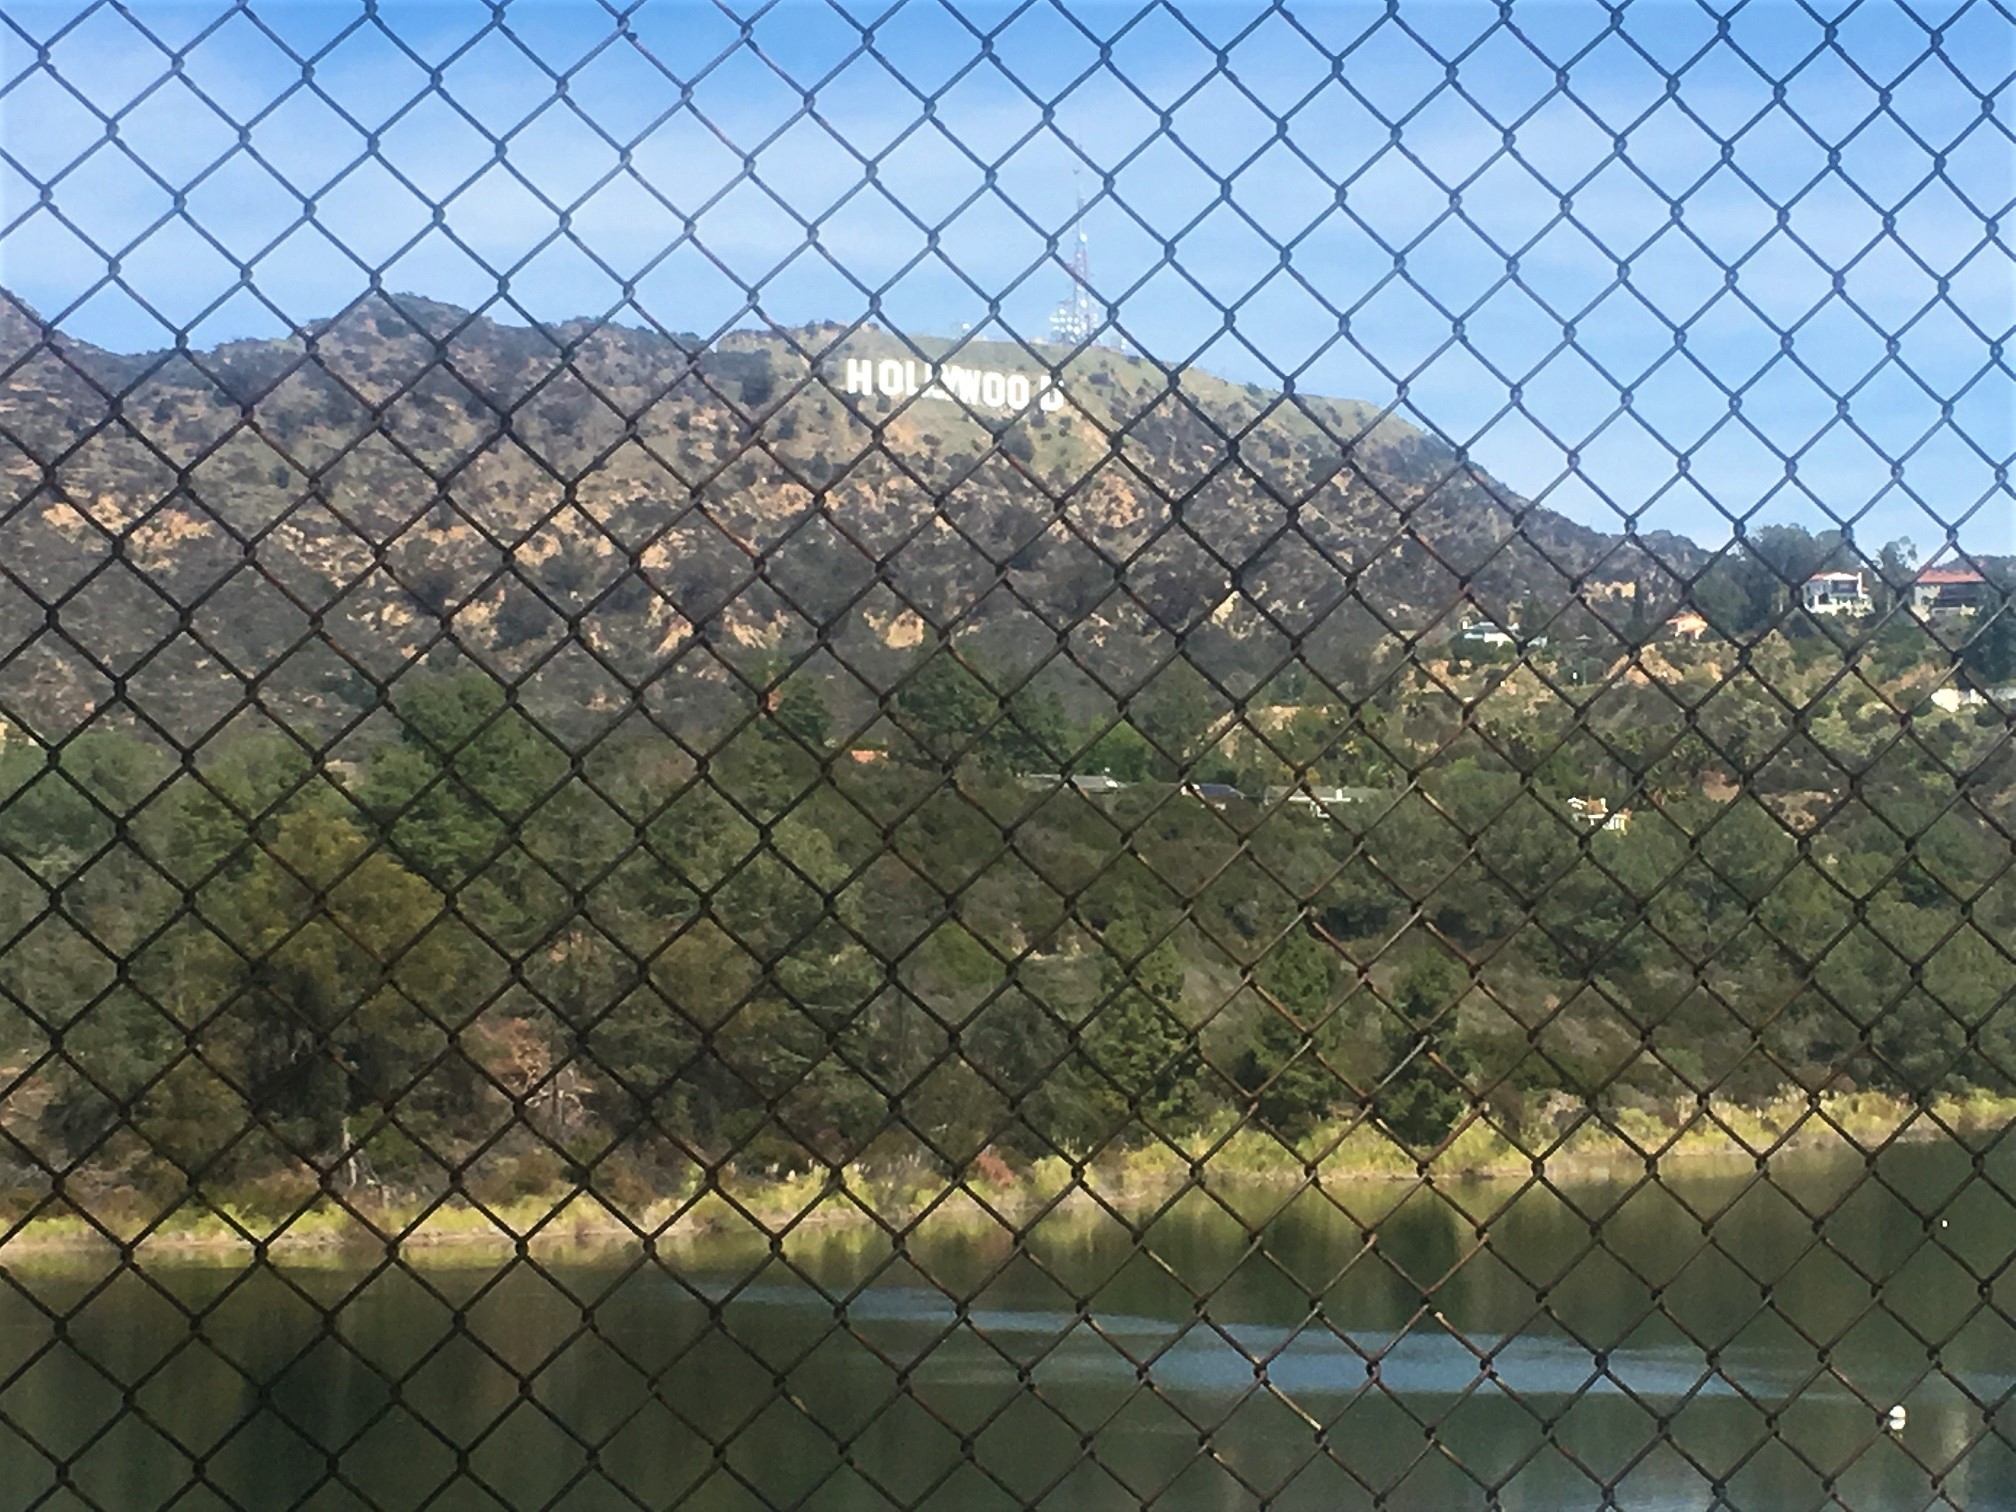 Walk View of Hollywood Sign